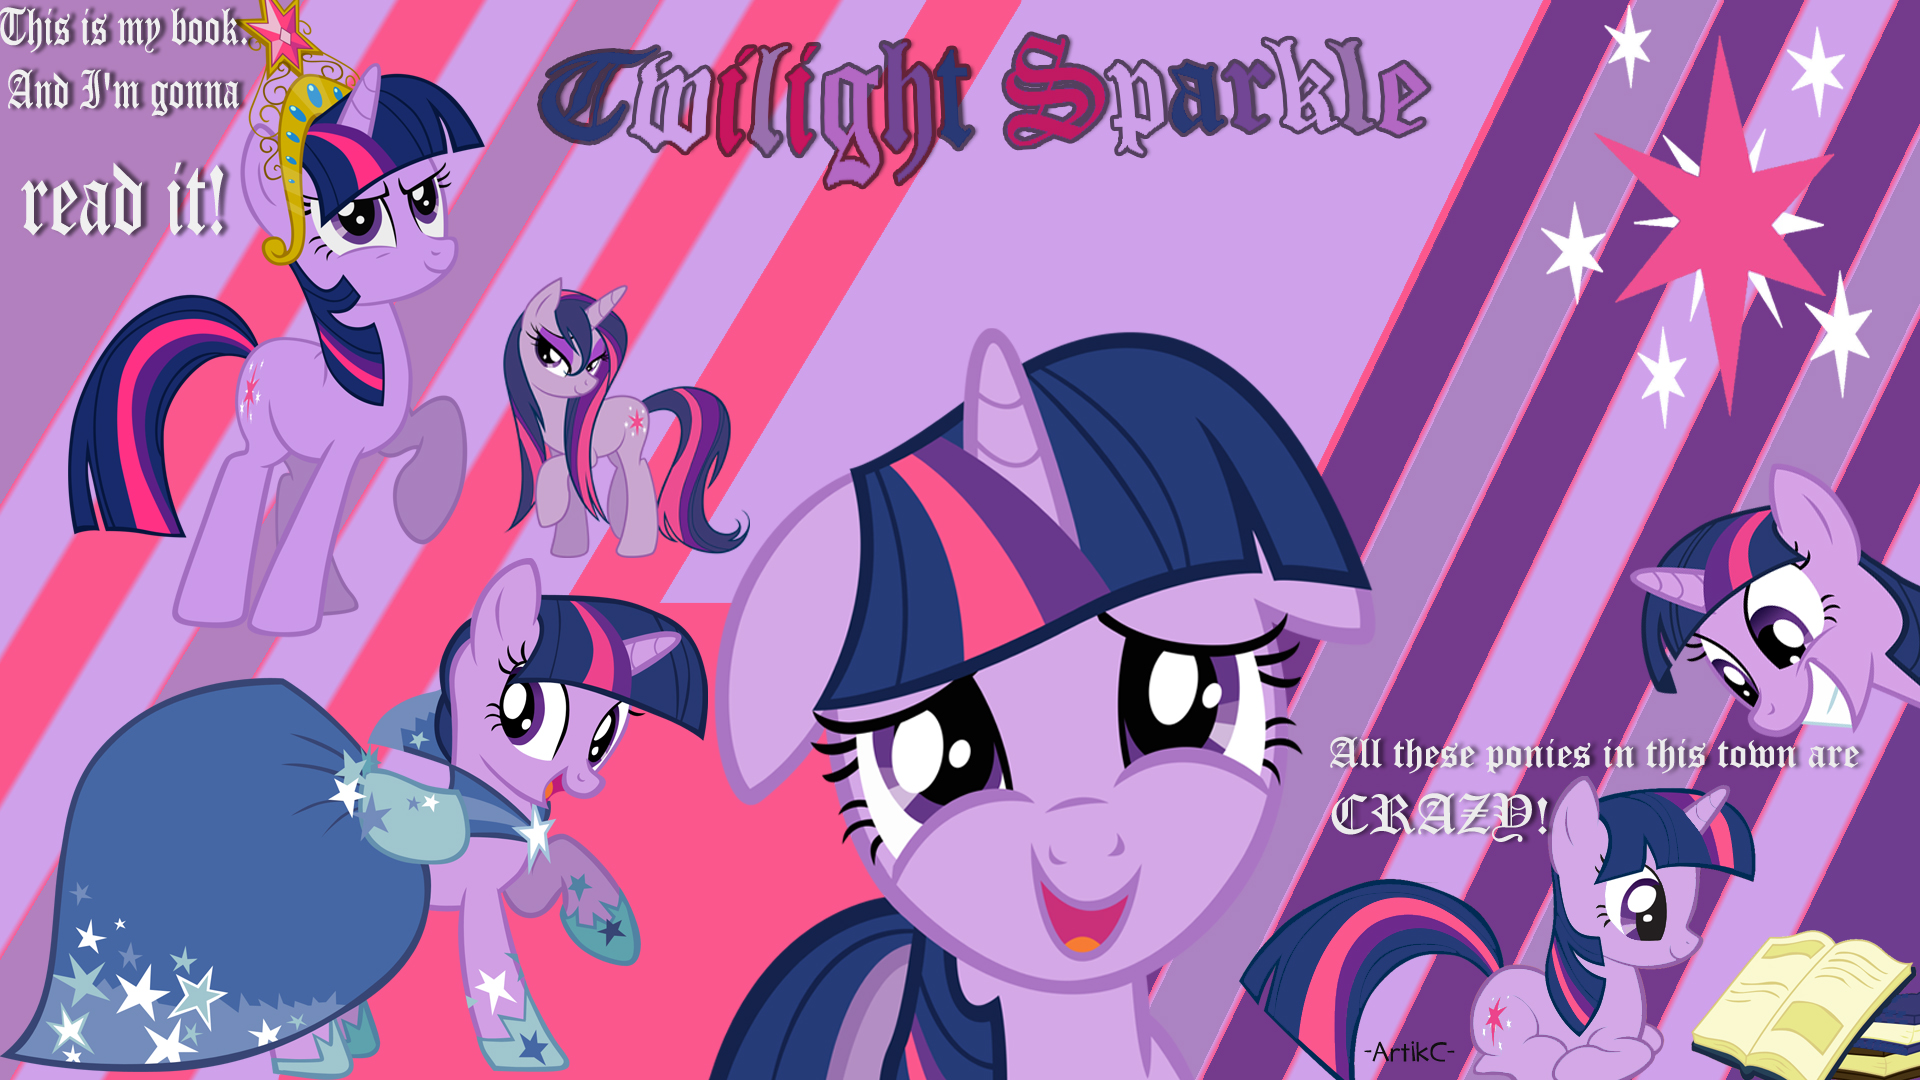 Chis Is Mp Read It All These Porties In This Towm Are - Twilight Sparkle Wallpaper My Little Pony - HD Wallpaper 